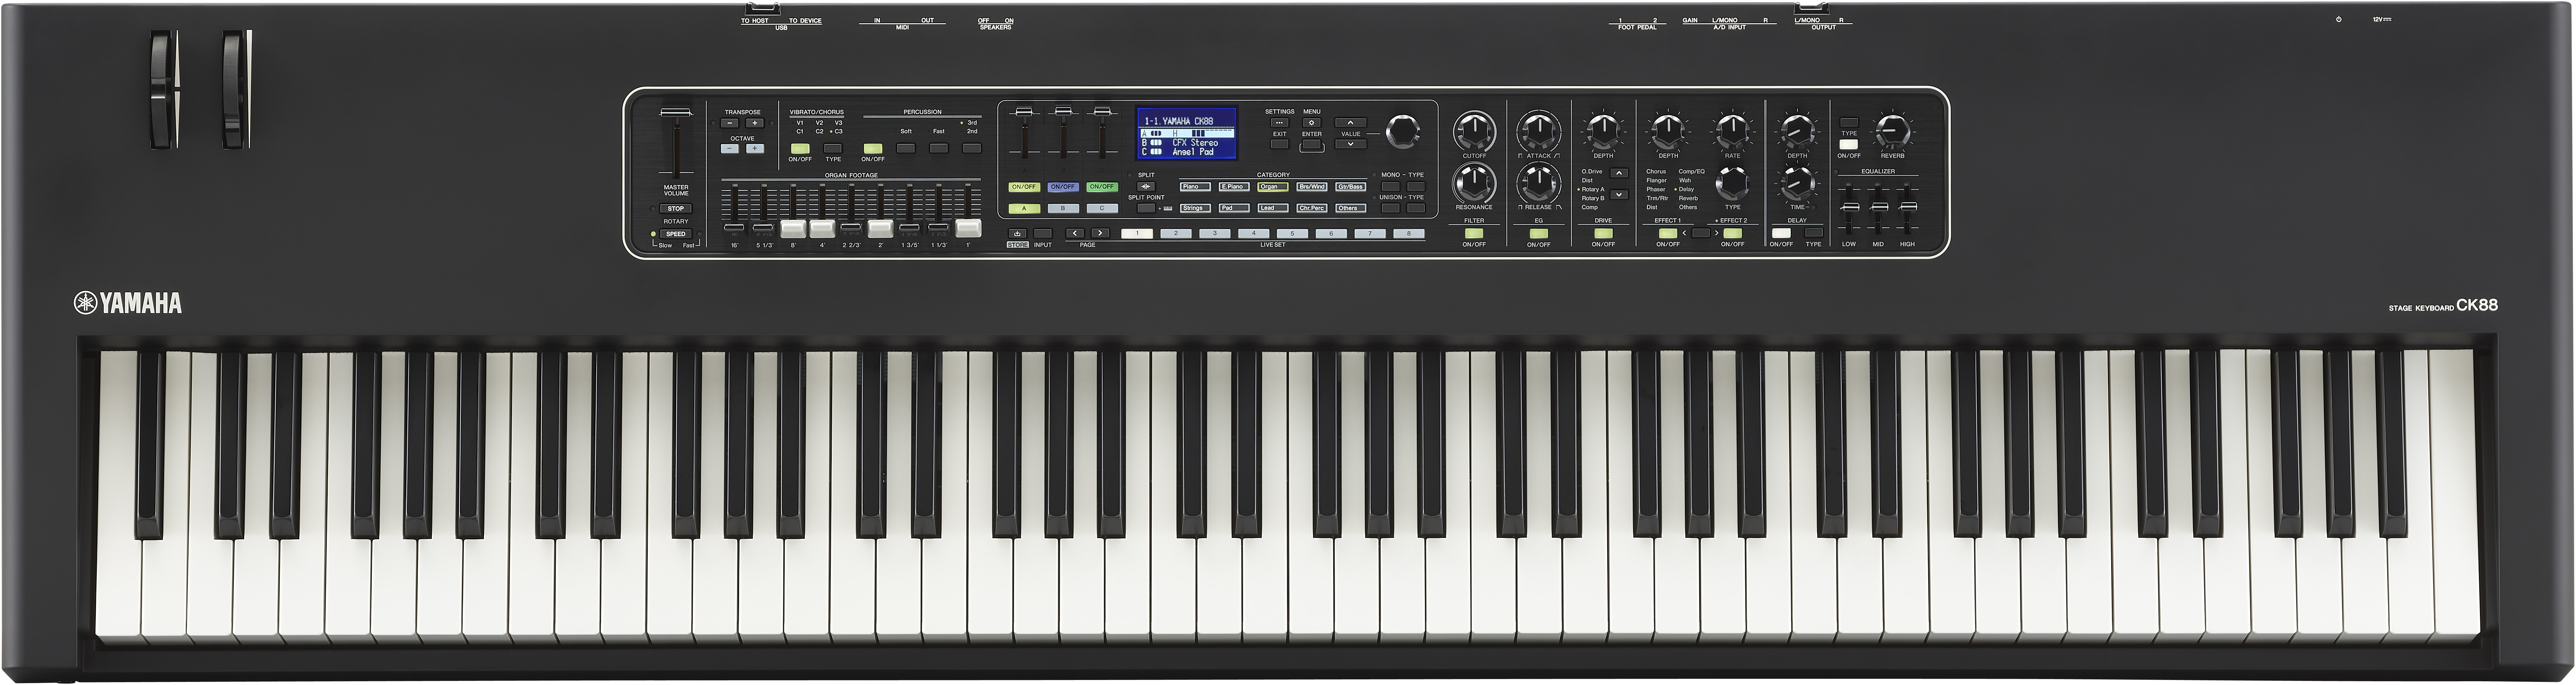 Yamaha Ck 88 - Stage keyboard - Main picture